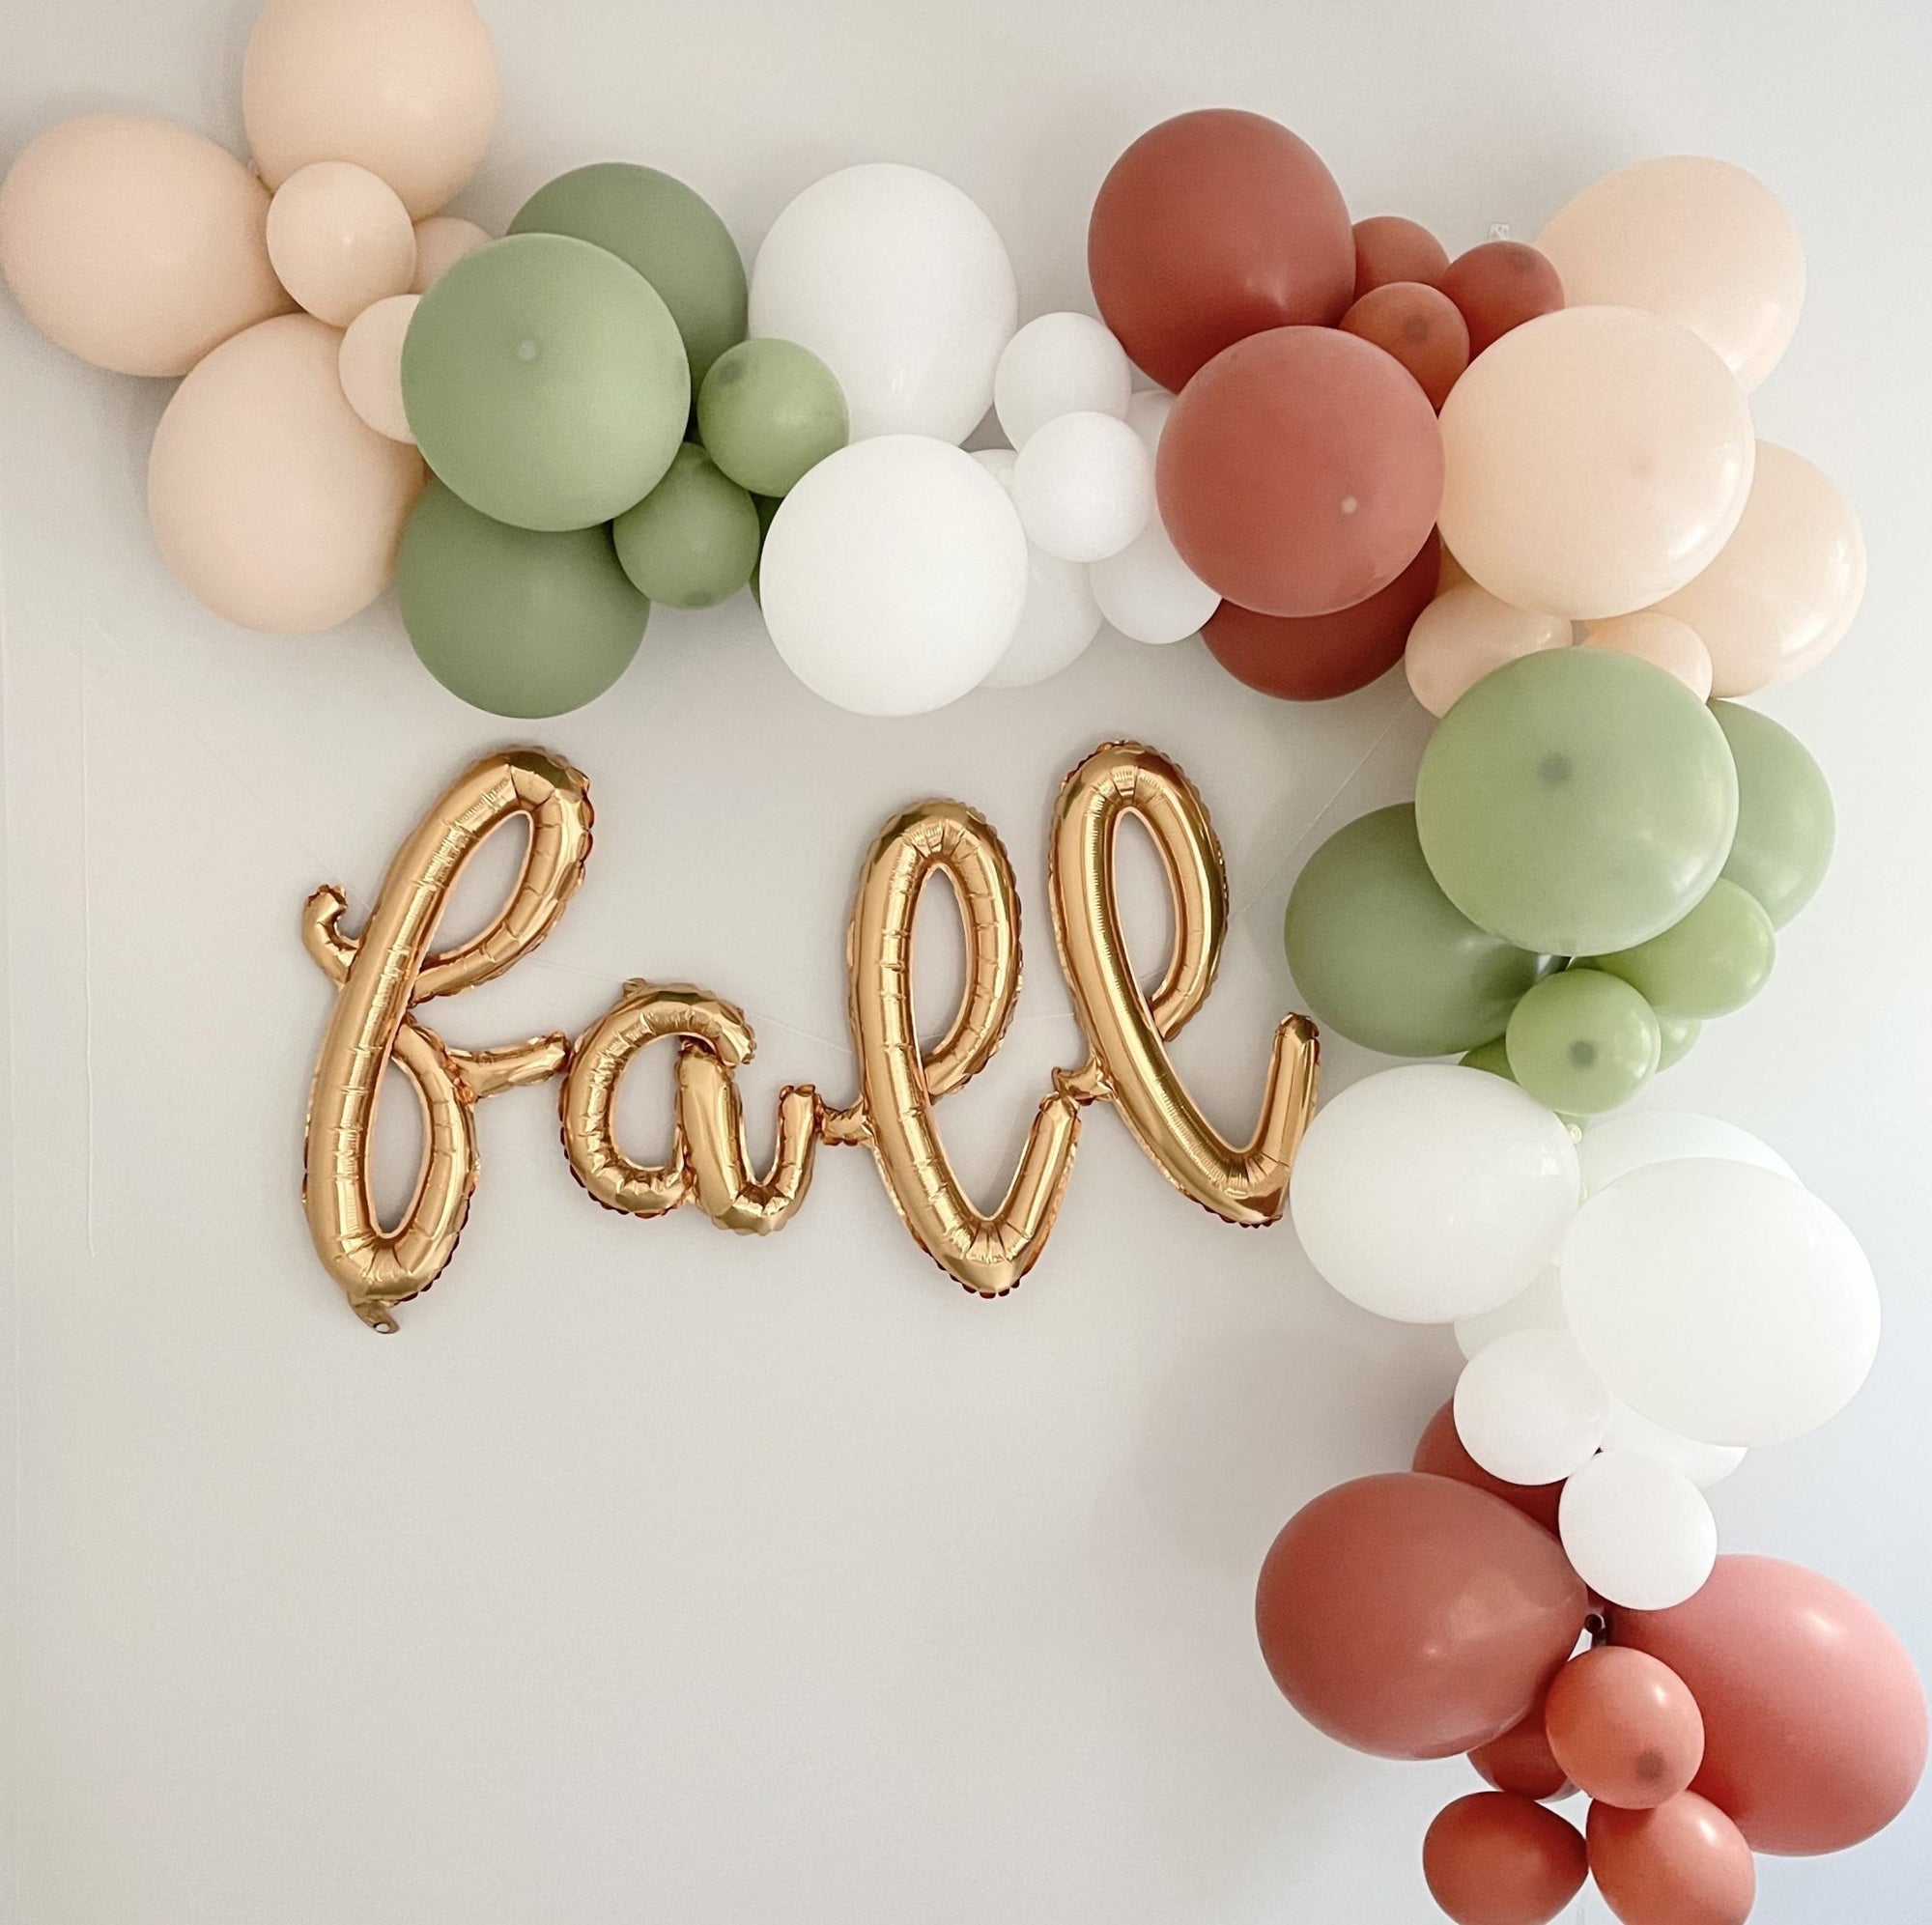 Boho Fall Balloon Arch Kit - Pretty Collected